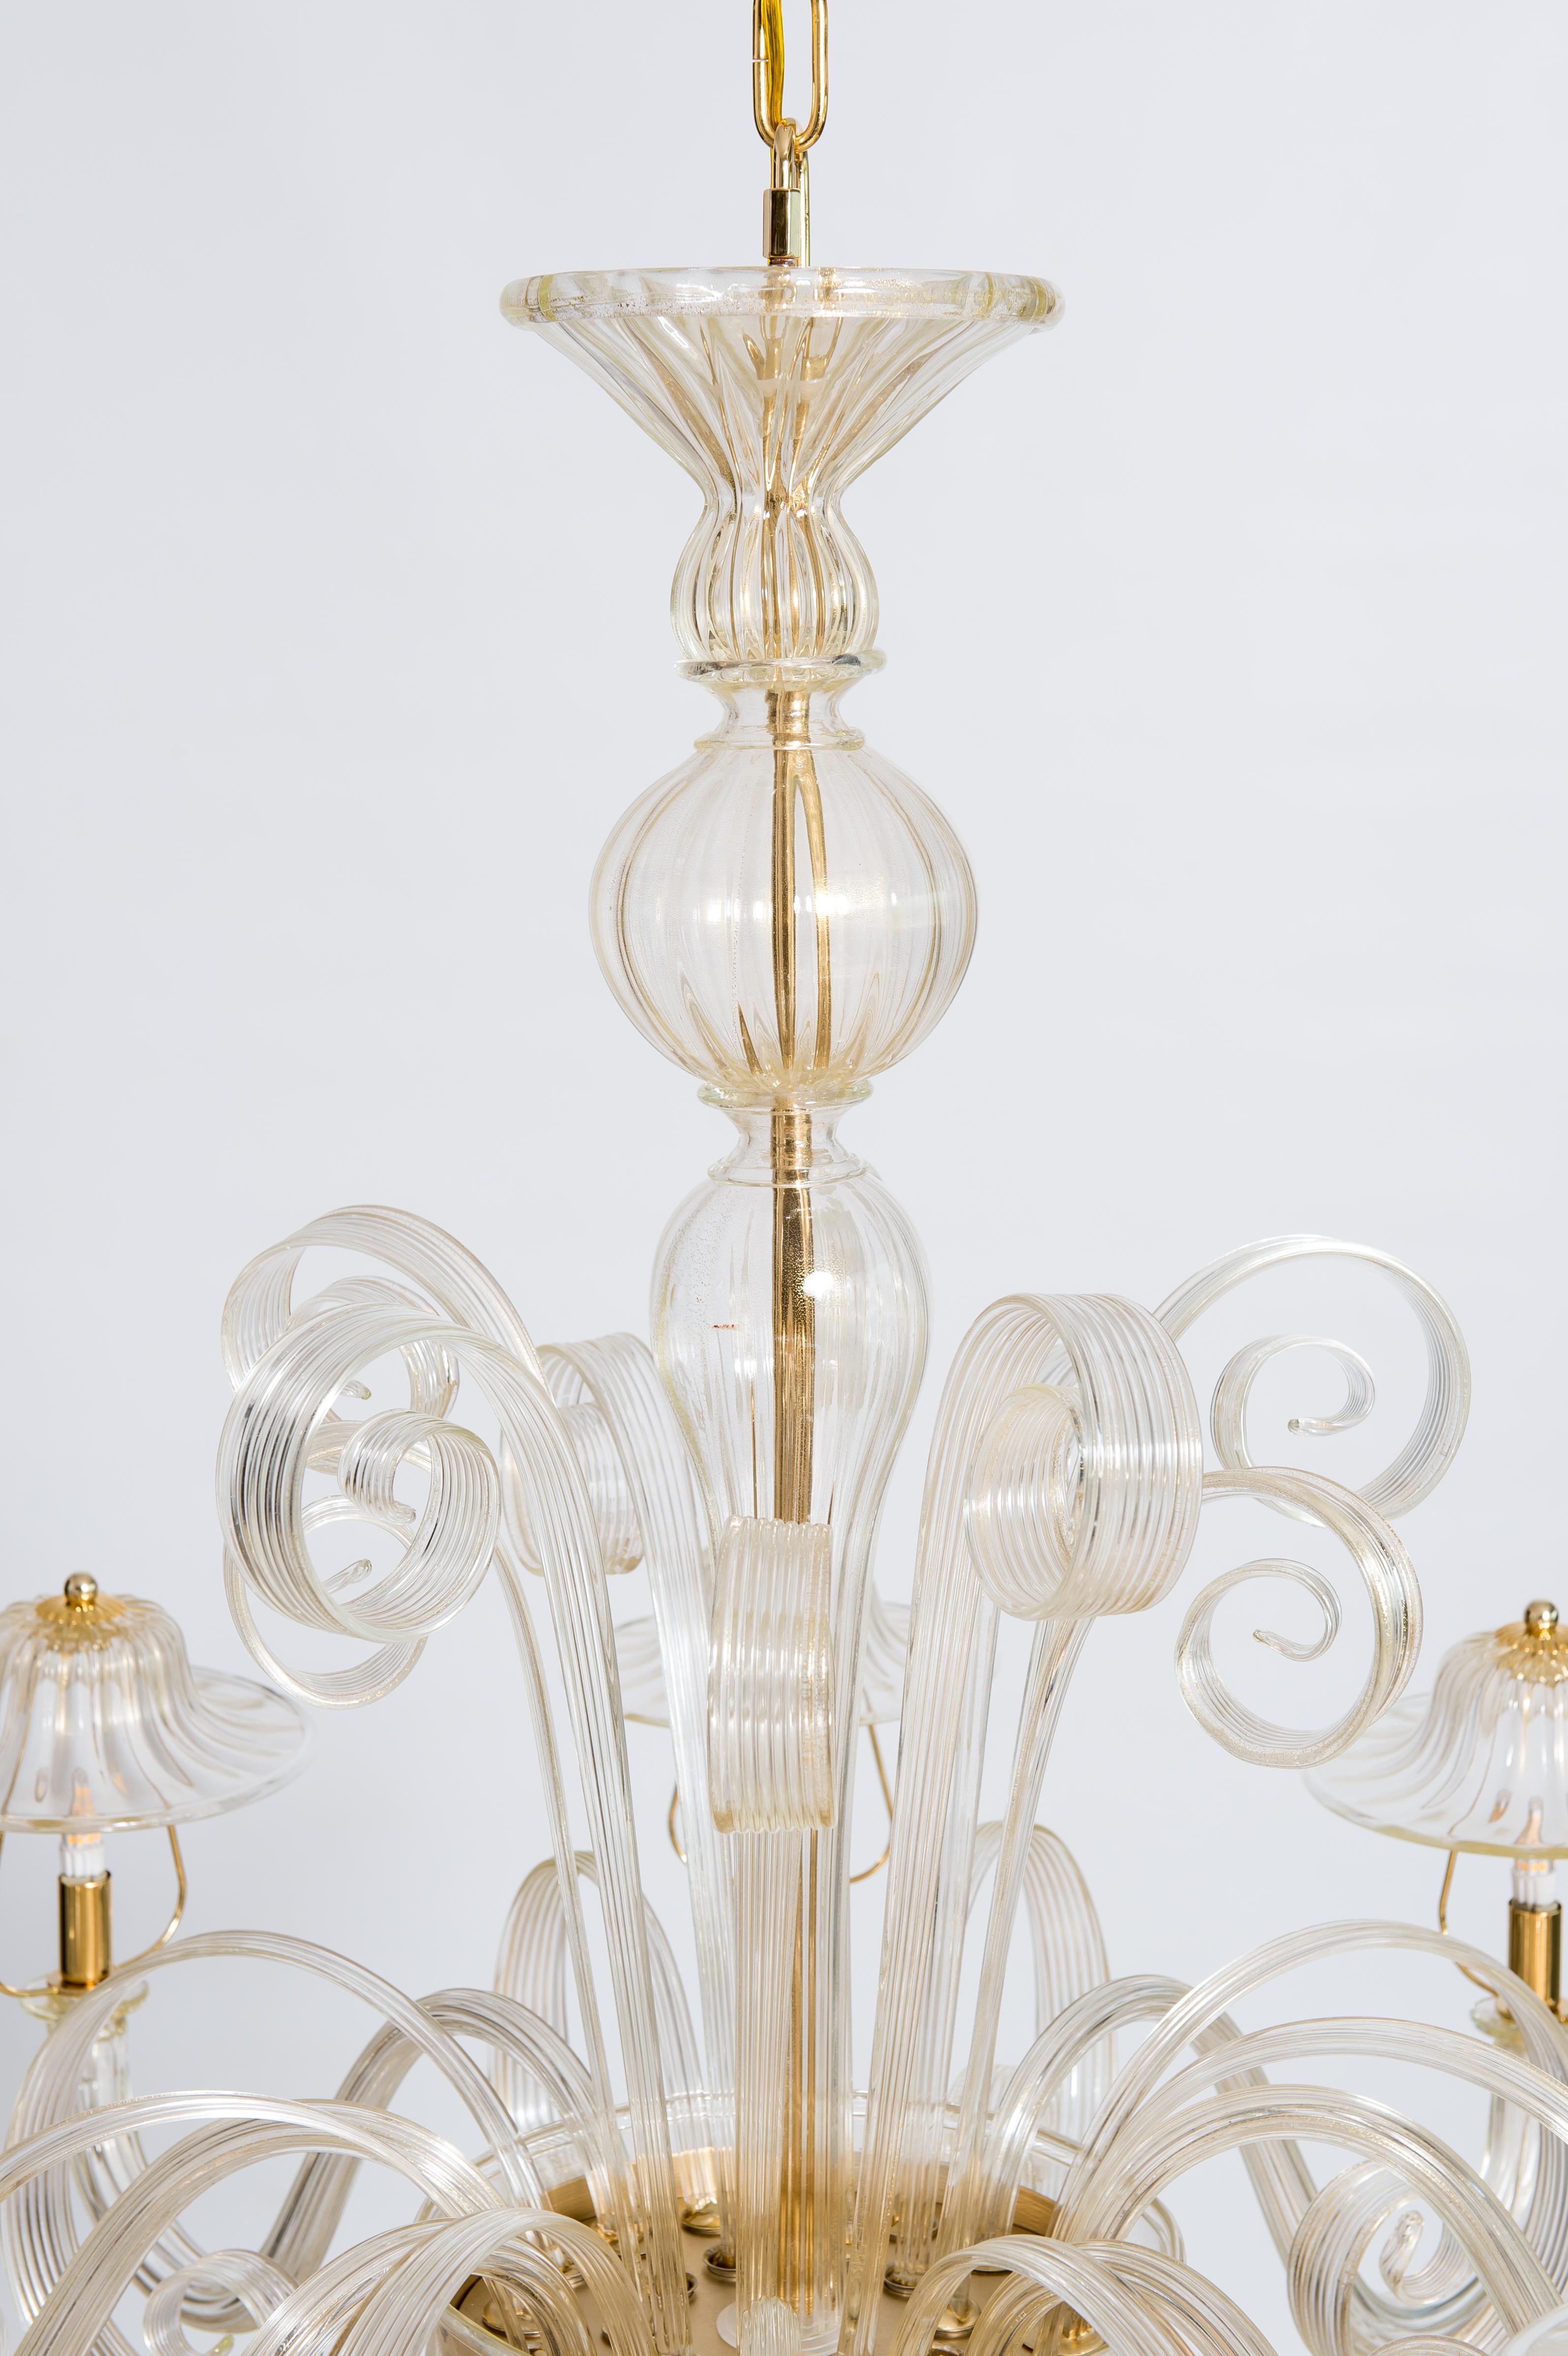 Murano Glass Chandelier with 24-Karat Gold and Pastoral Decorations, Italy For Sale 5